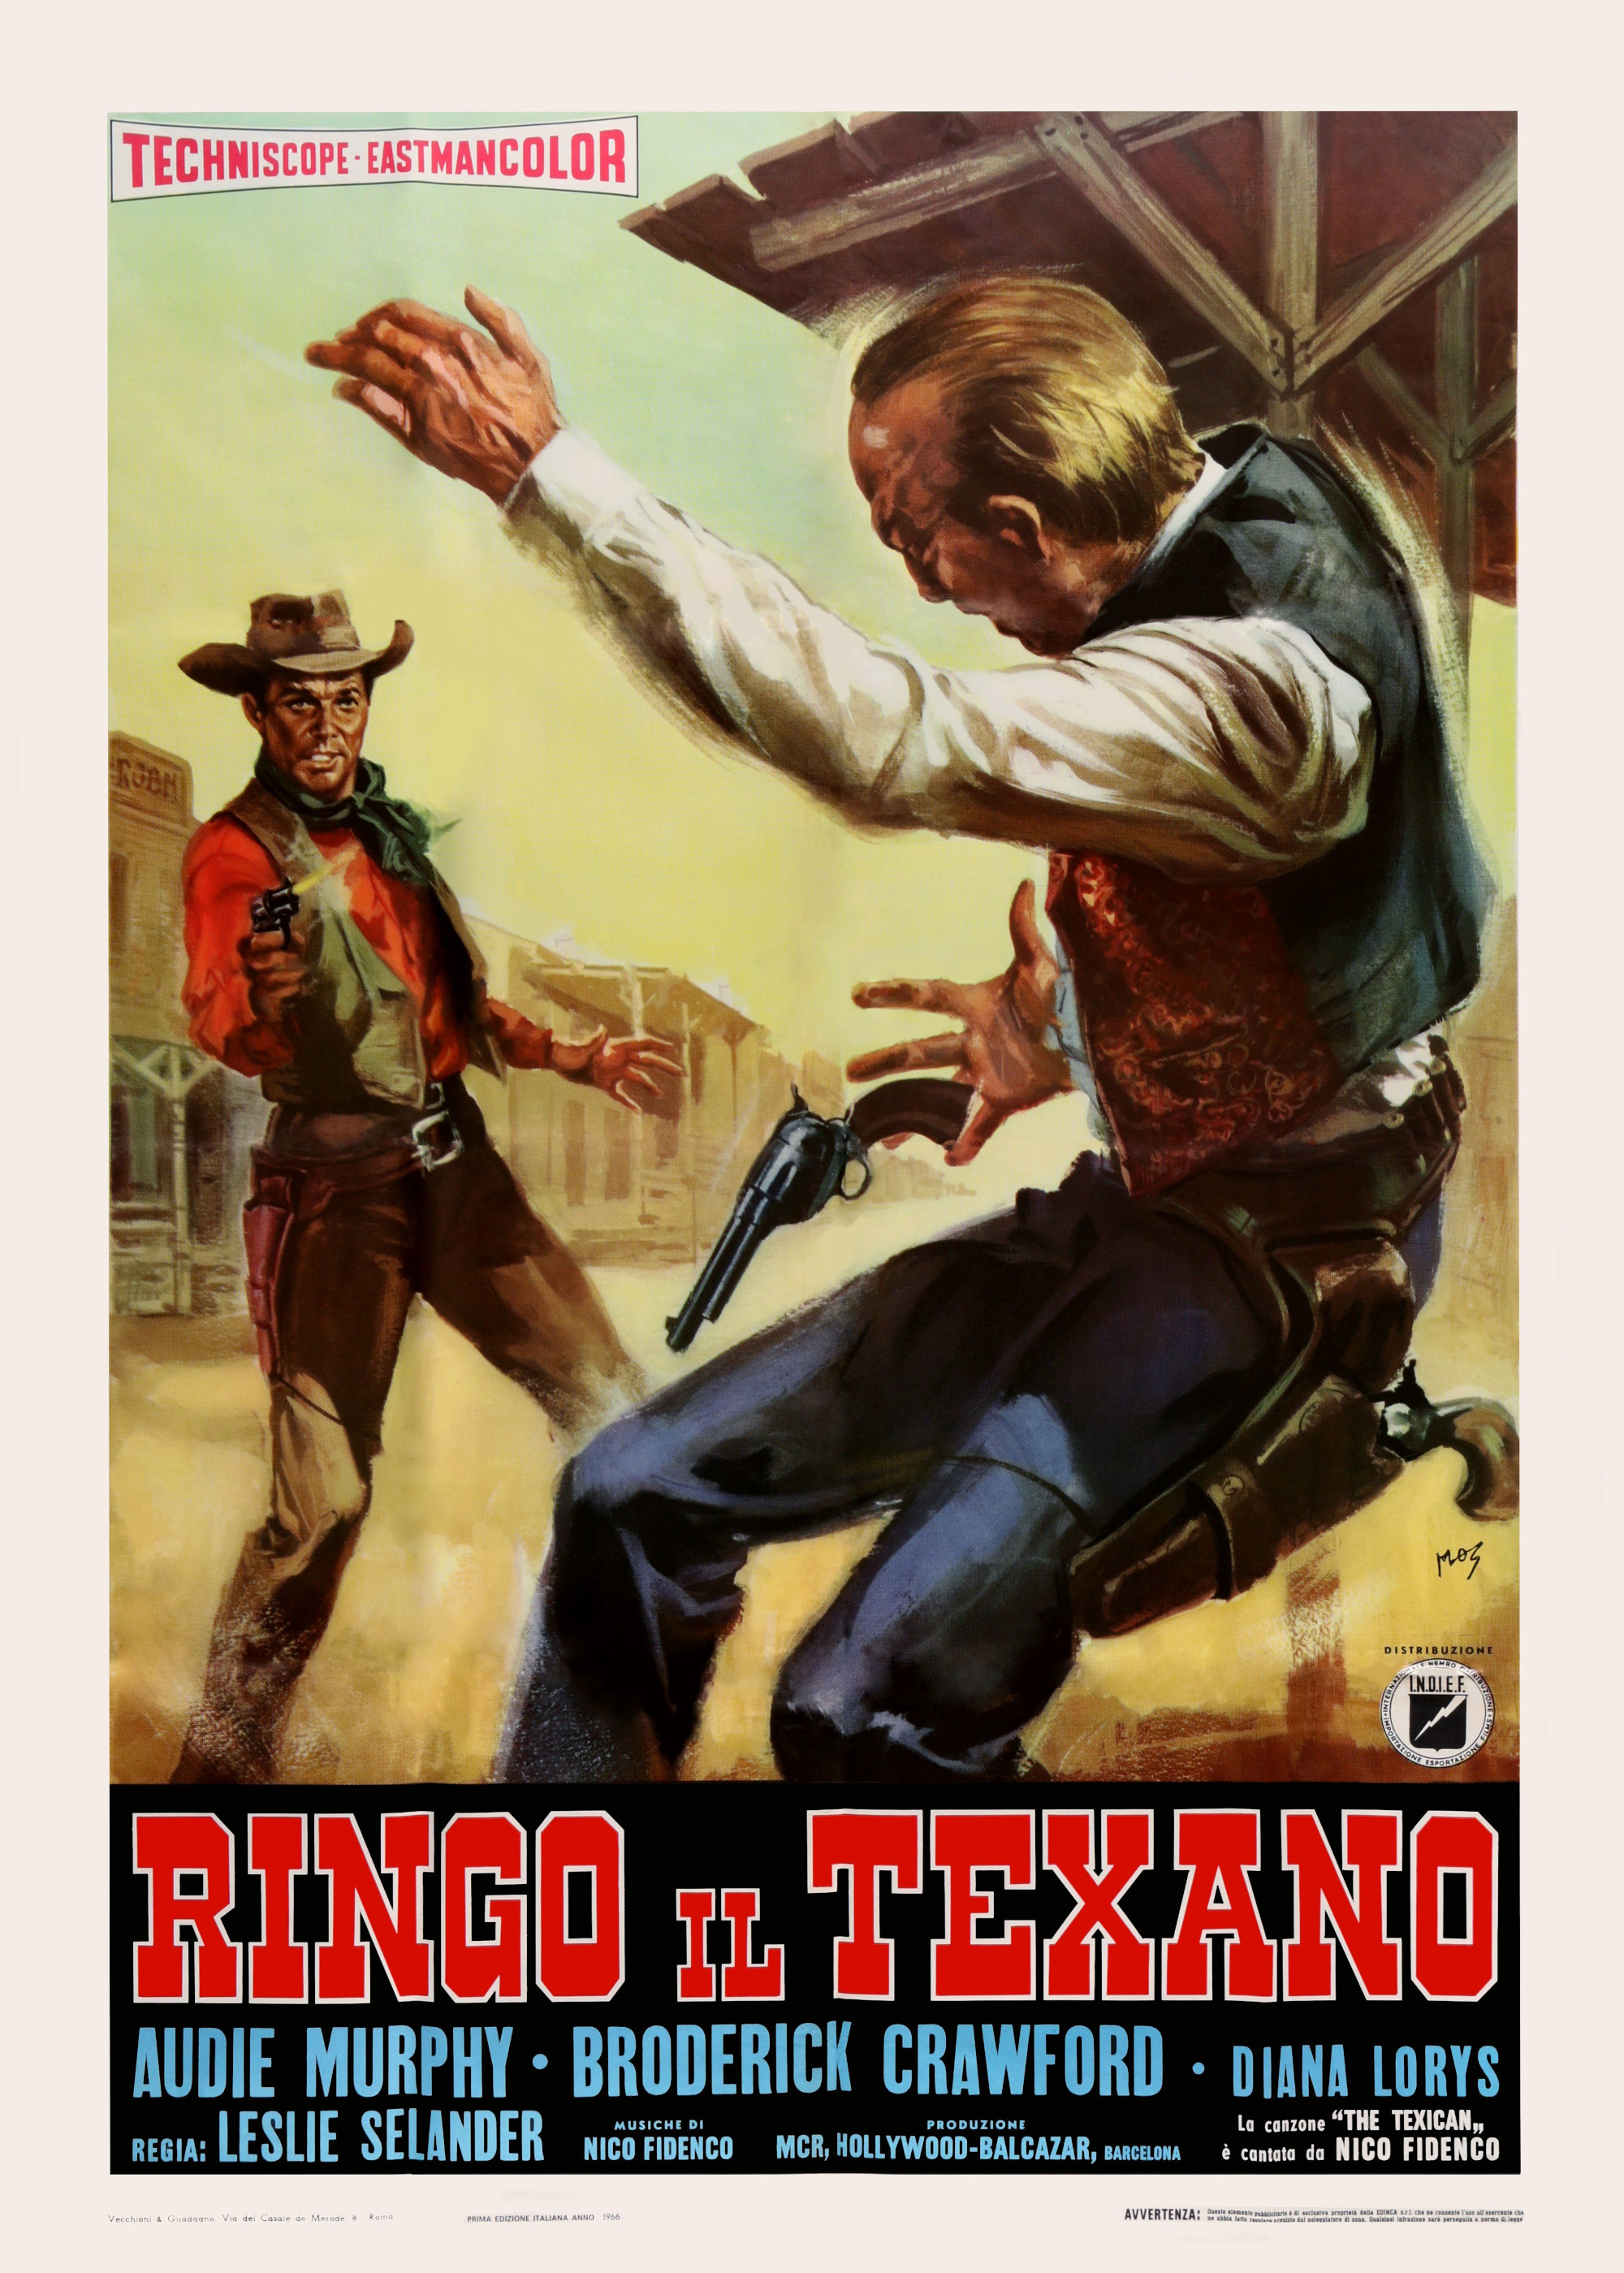 The Texican movie poster